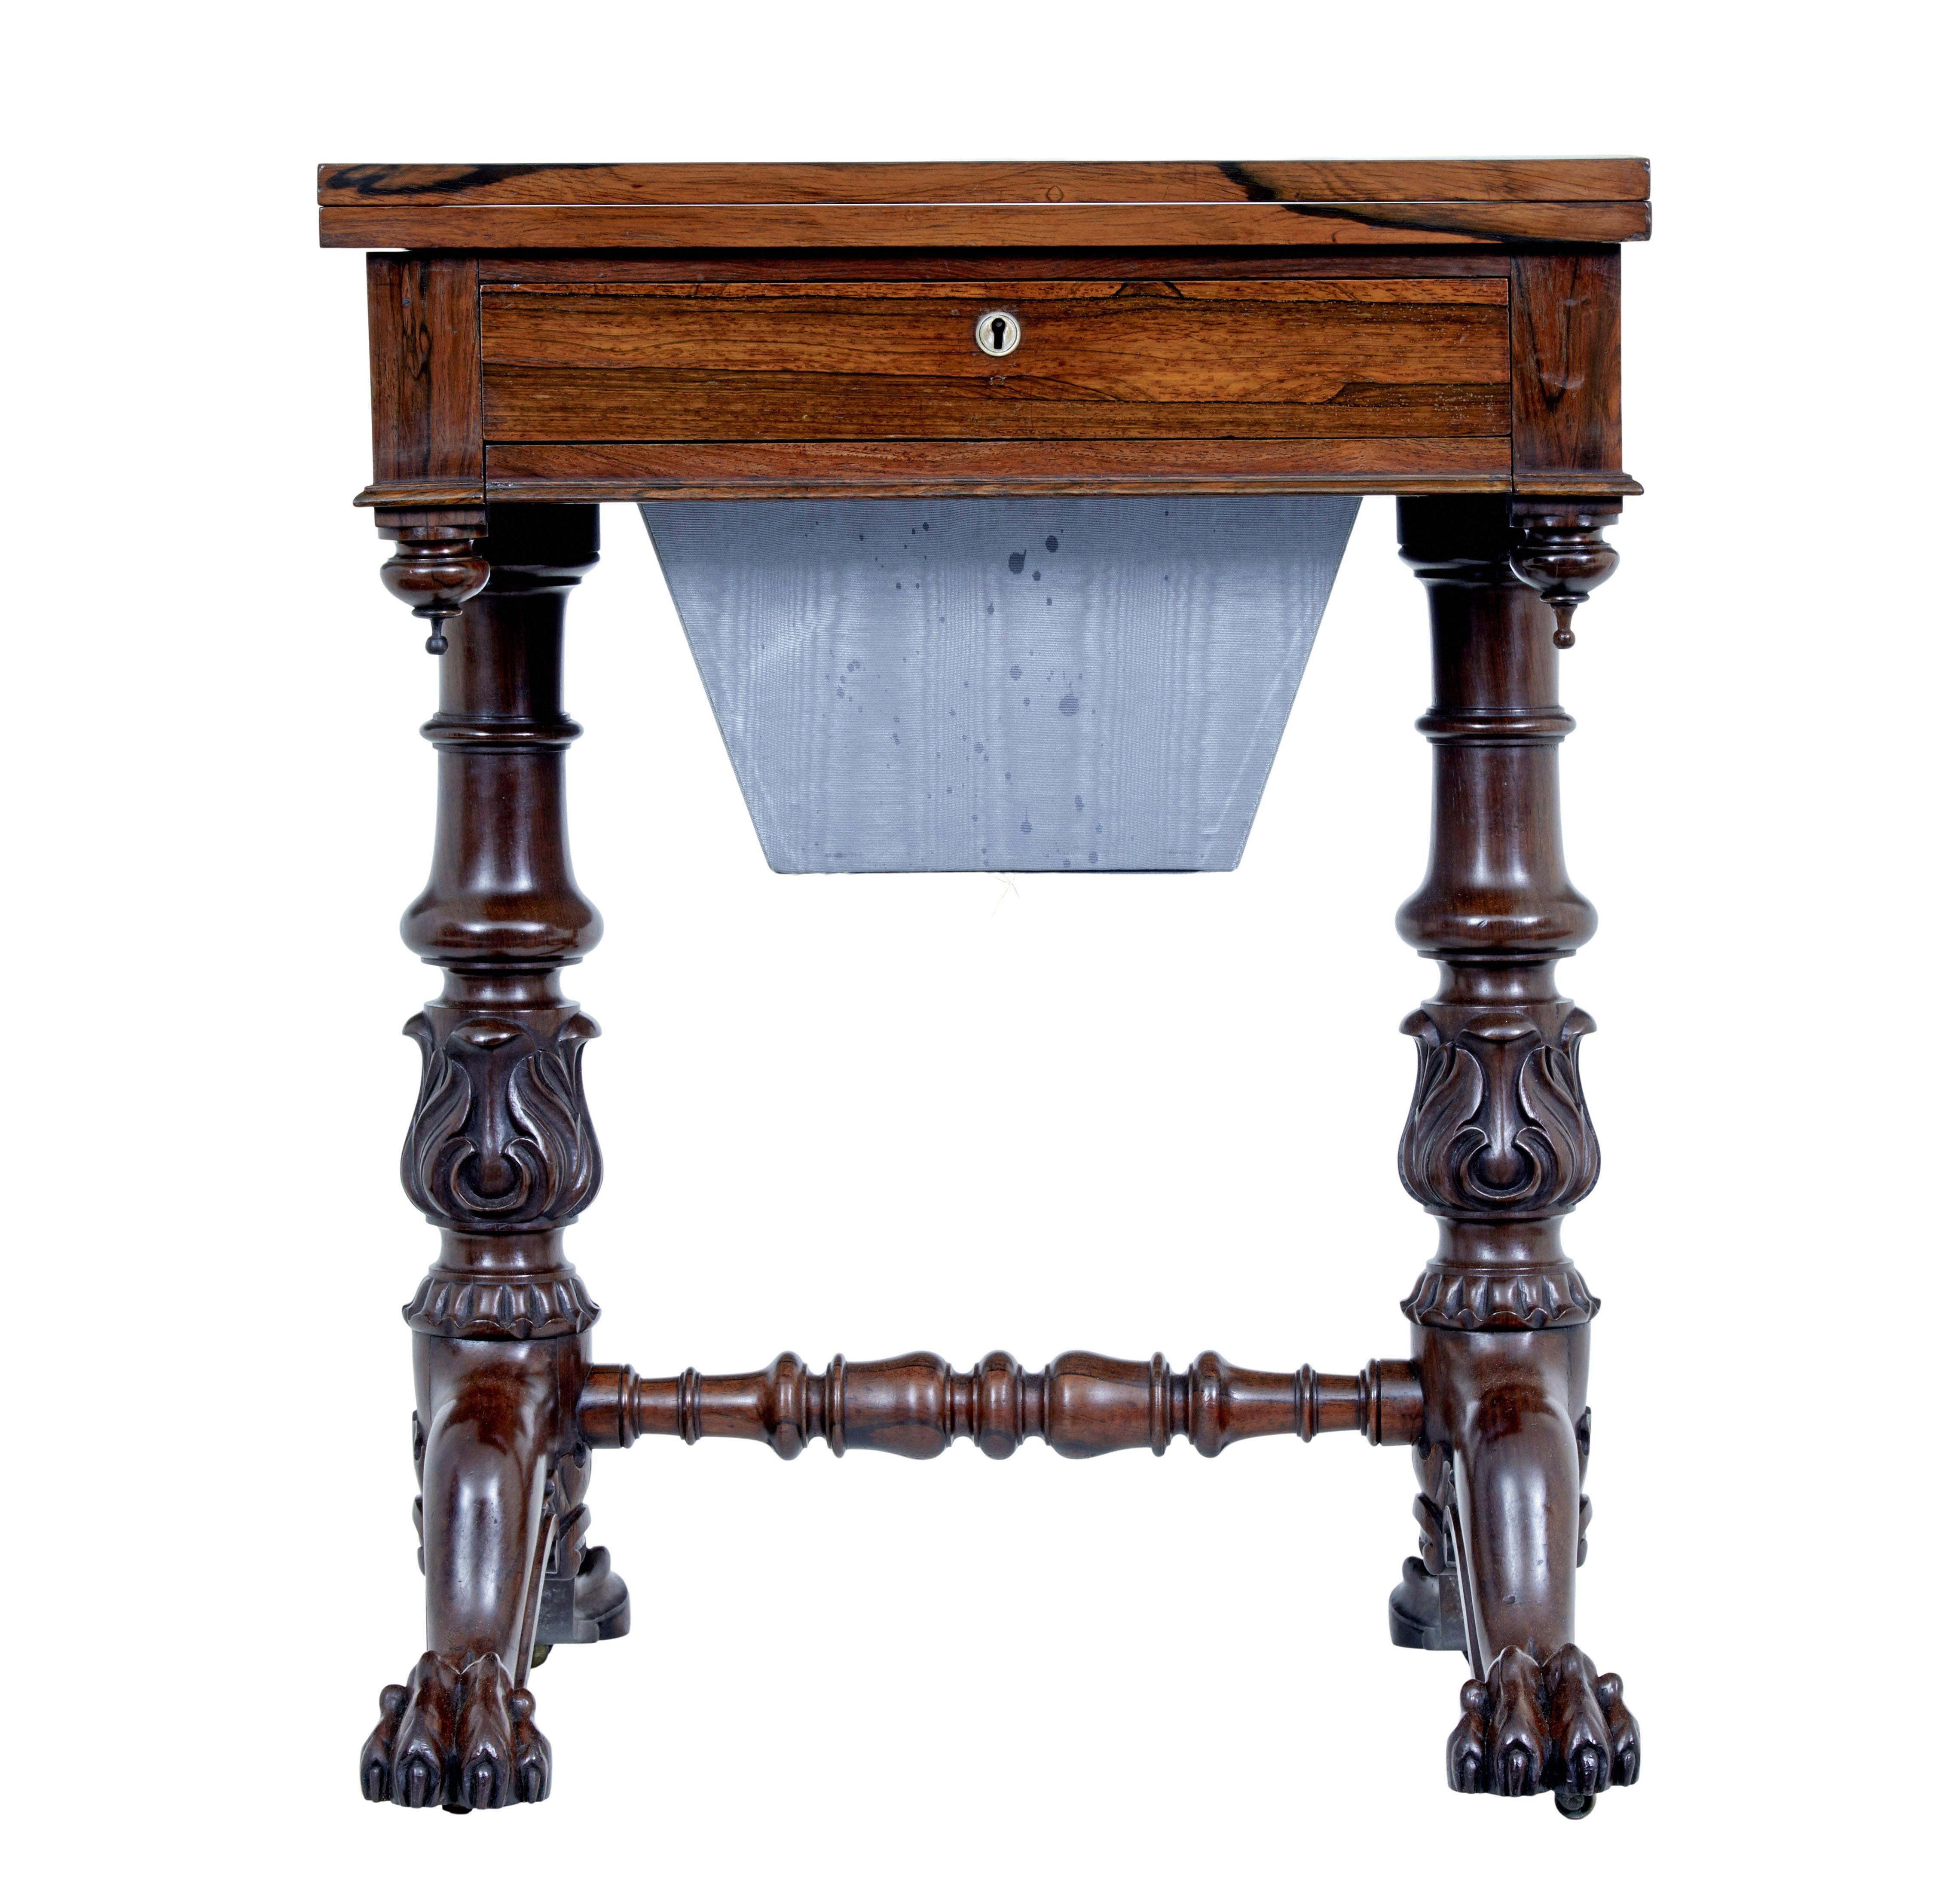 William iv 19th century palisander work table, circa 1830.

Made from stunning palisander with a rectangular top that rotates and flips open to form a bigger surface. Single silk lined drawer below the top surface which is now missing its